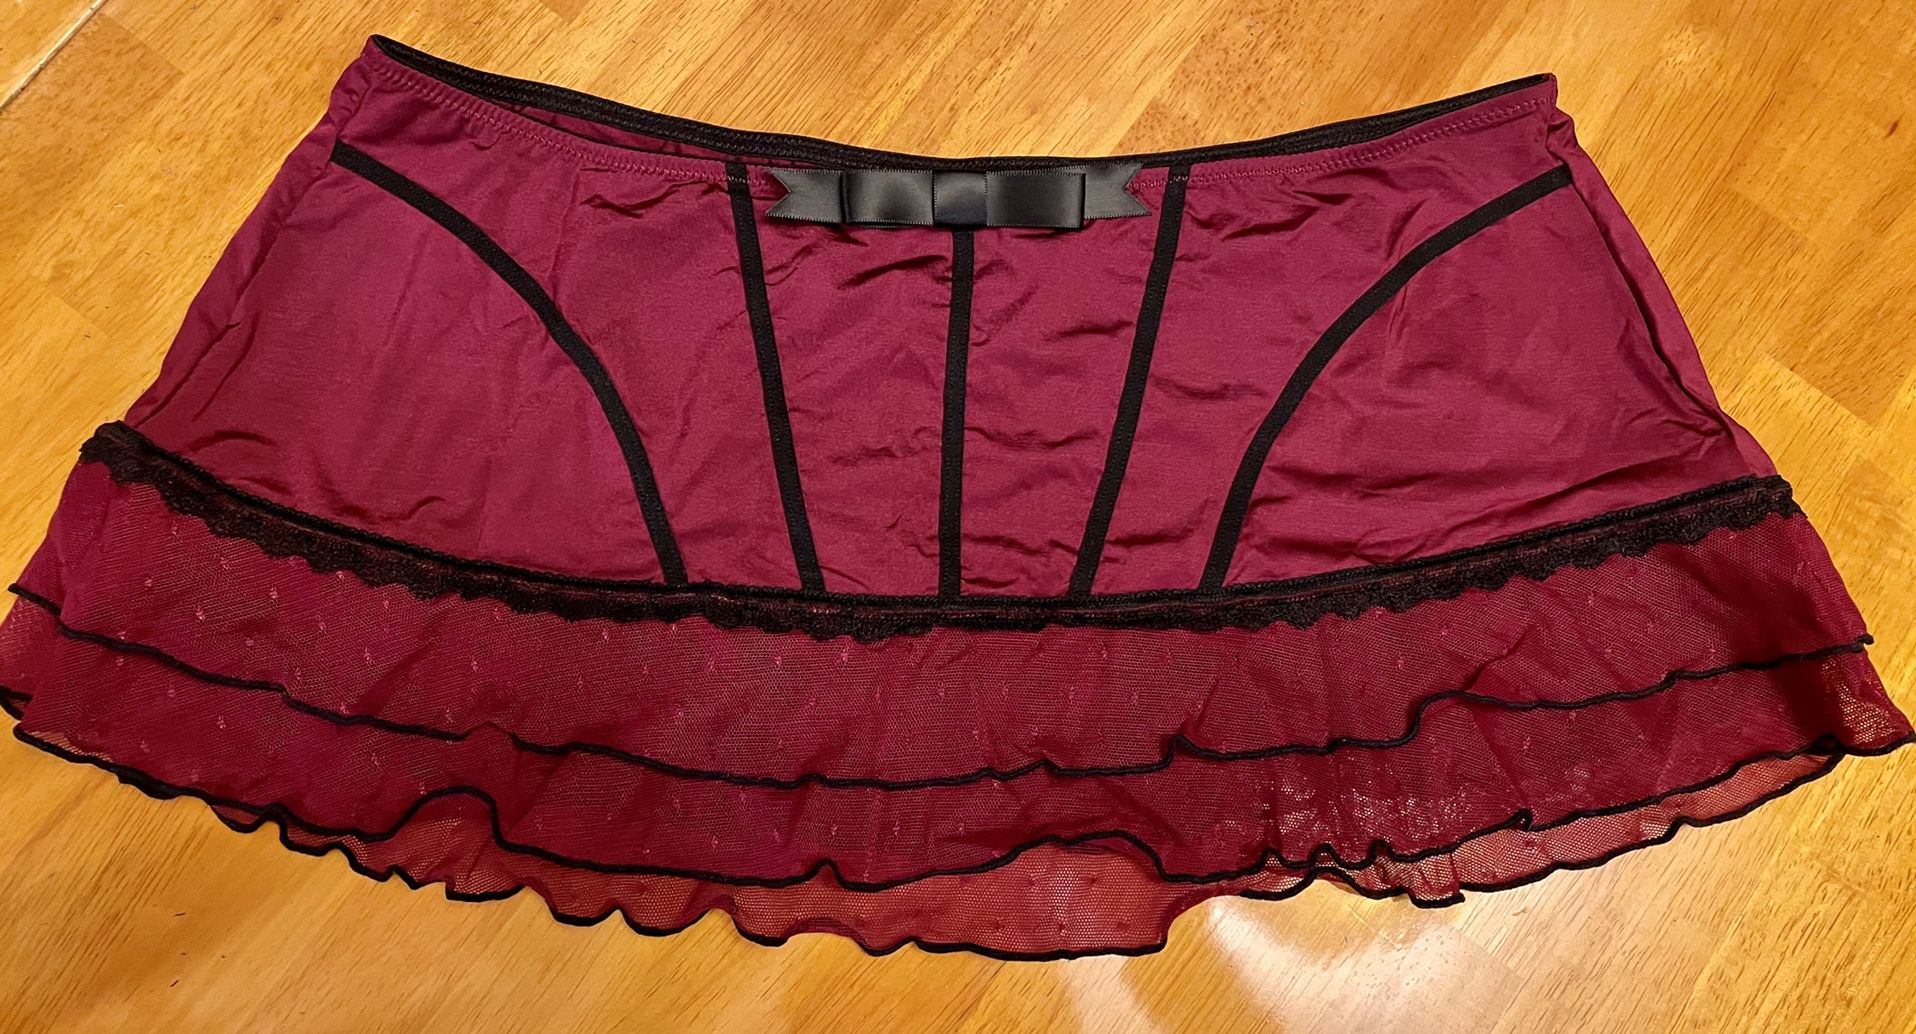 New without tags, APT. 9 Intimates Skirt—-Size Large